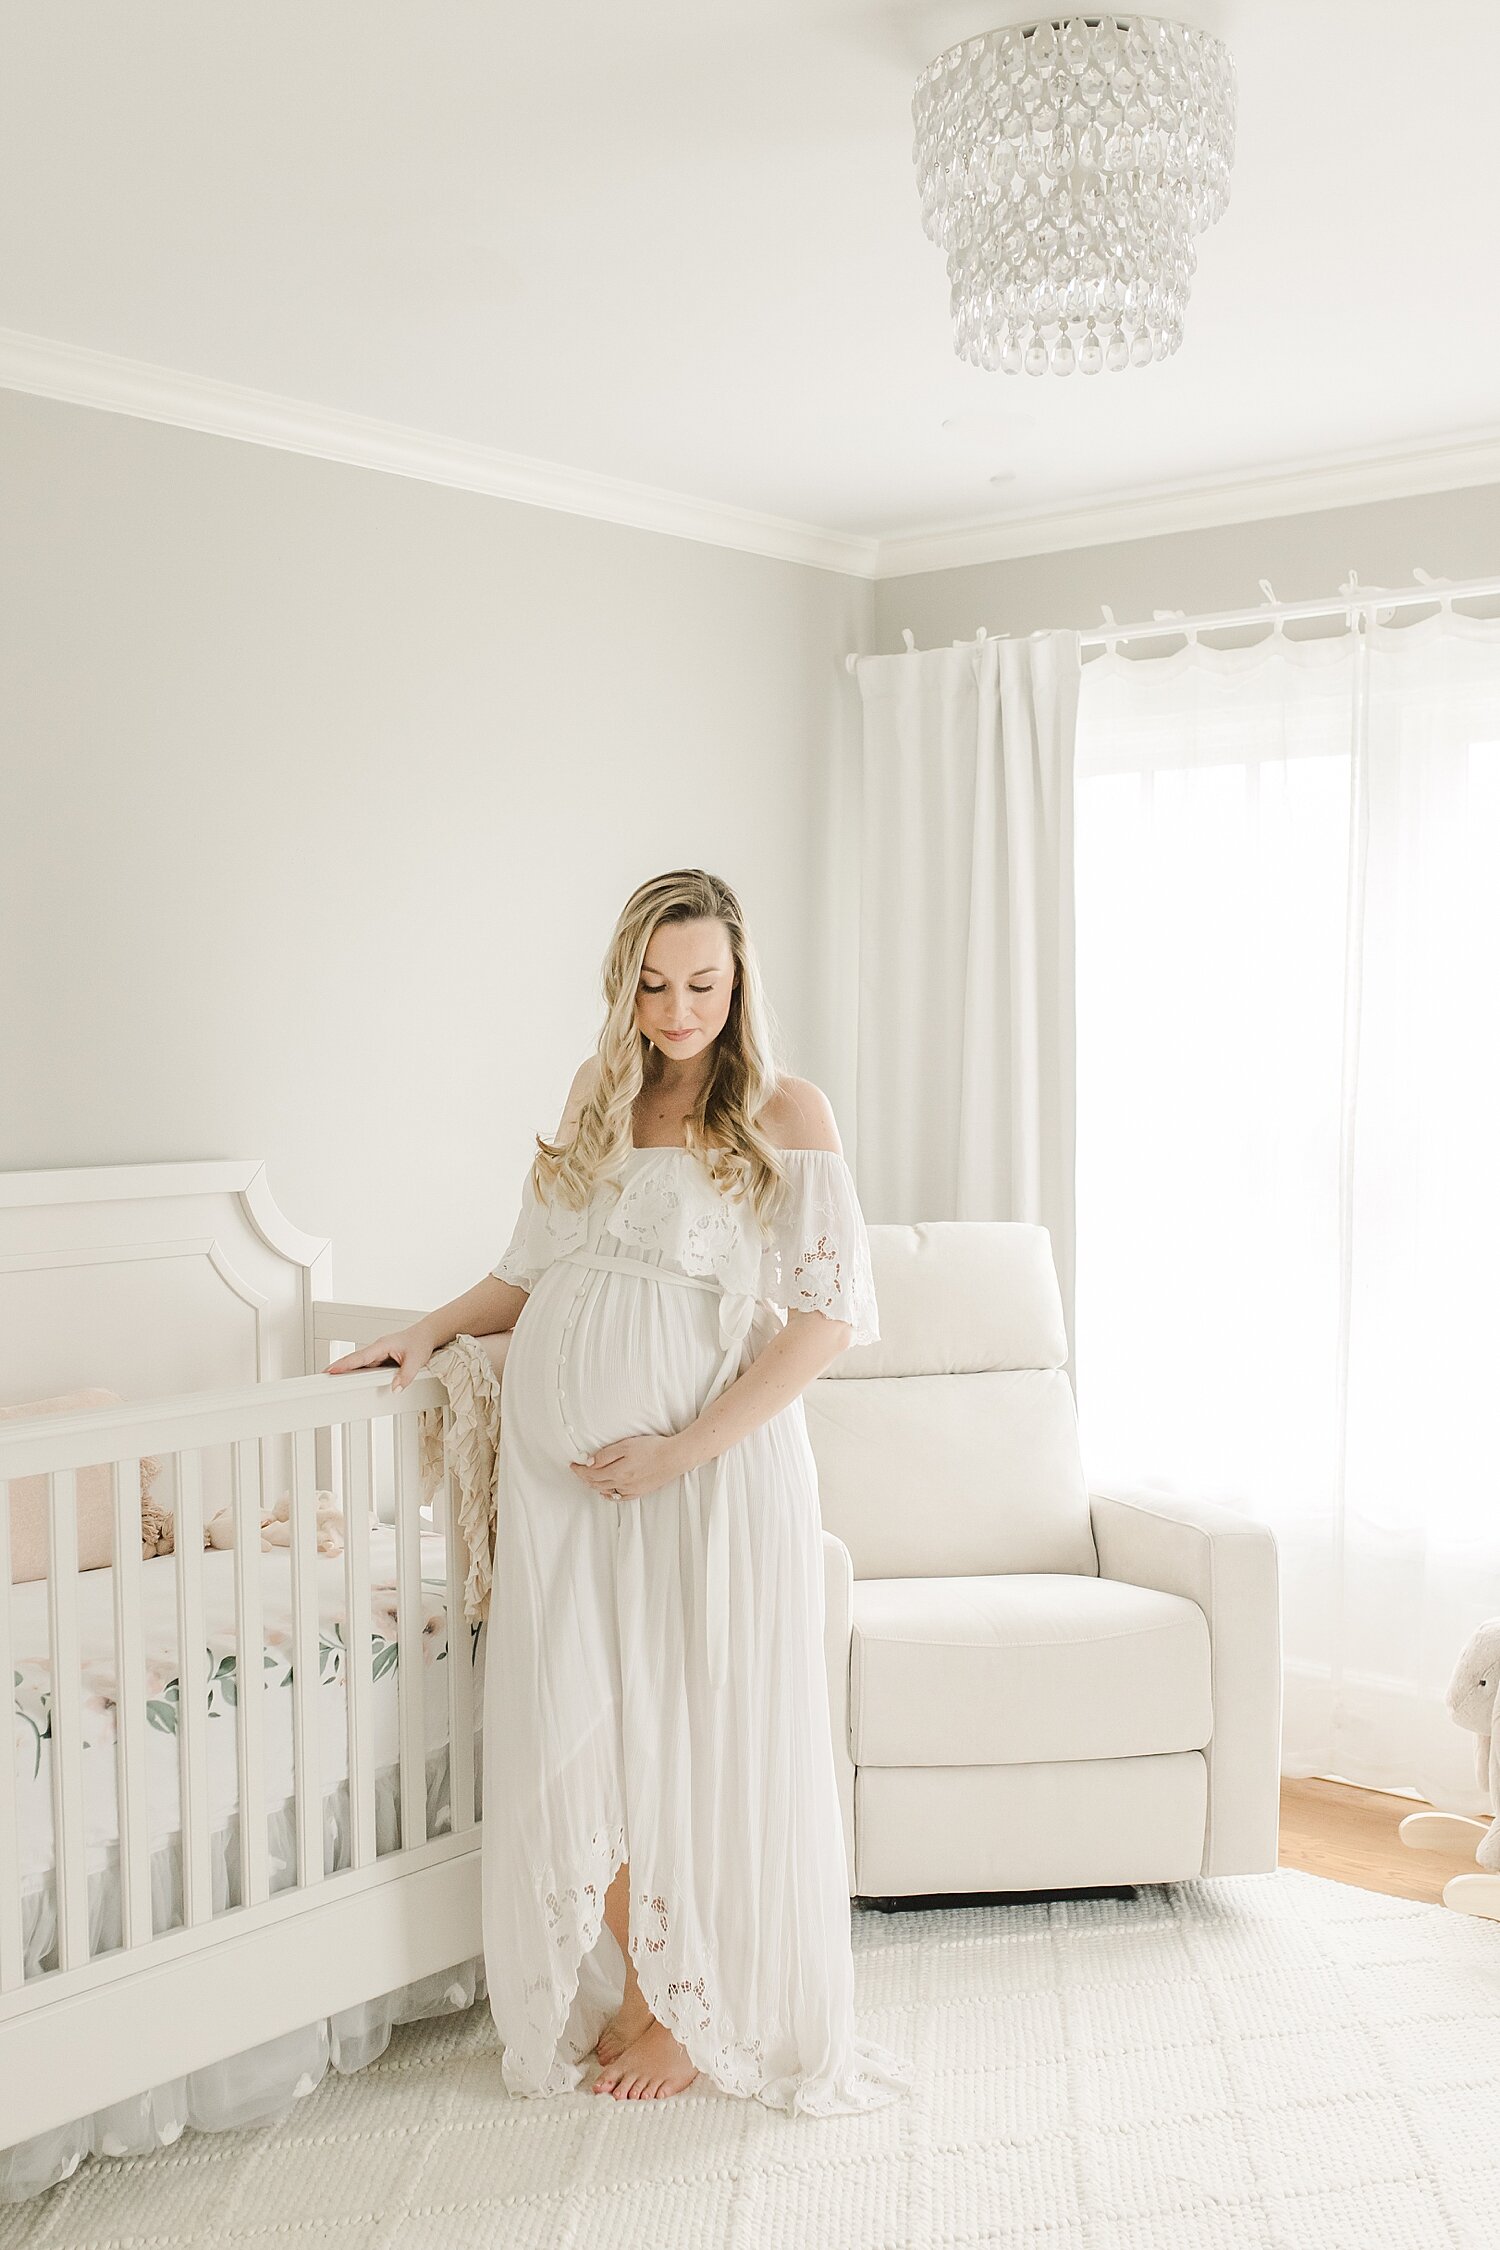 Mom standing in front of crib in baby girl's nursery. Maternity photos by Kristin Wood Photography.